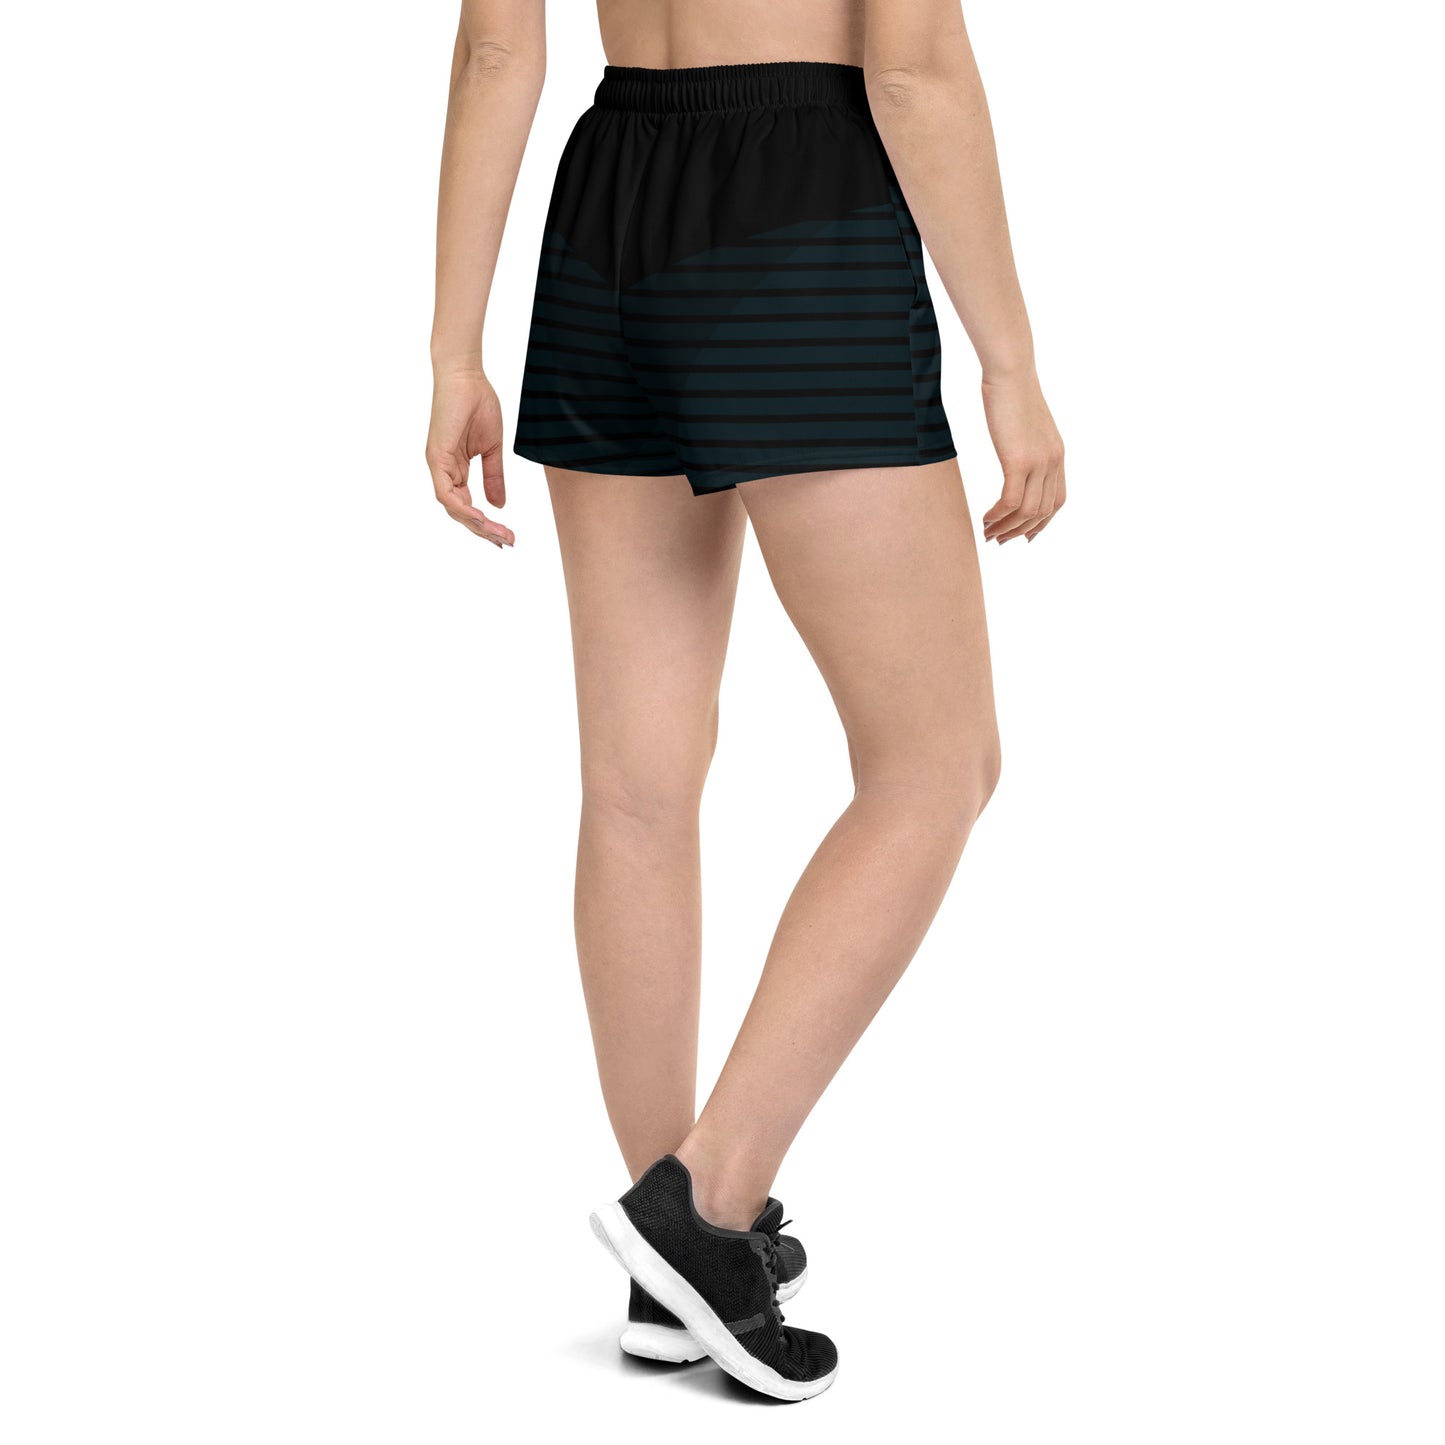 Women’s Rugby Shorts (w/ Pockets)